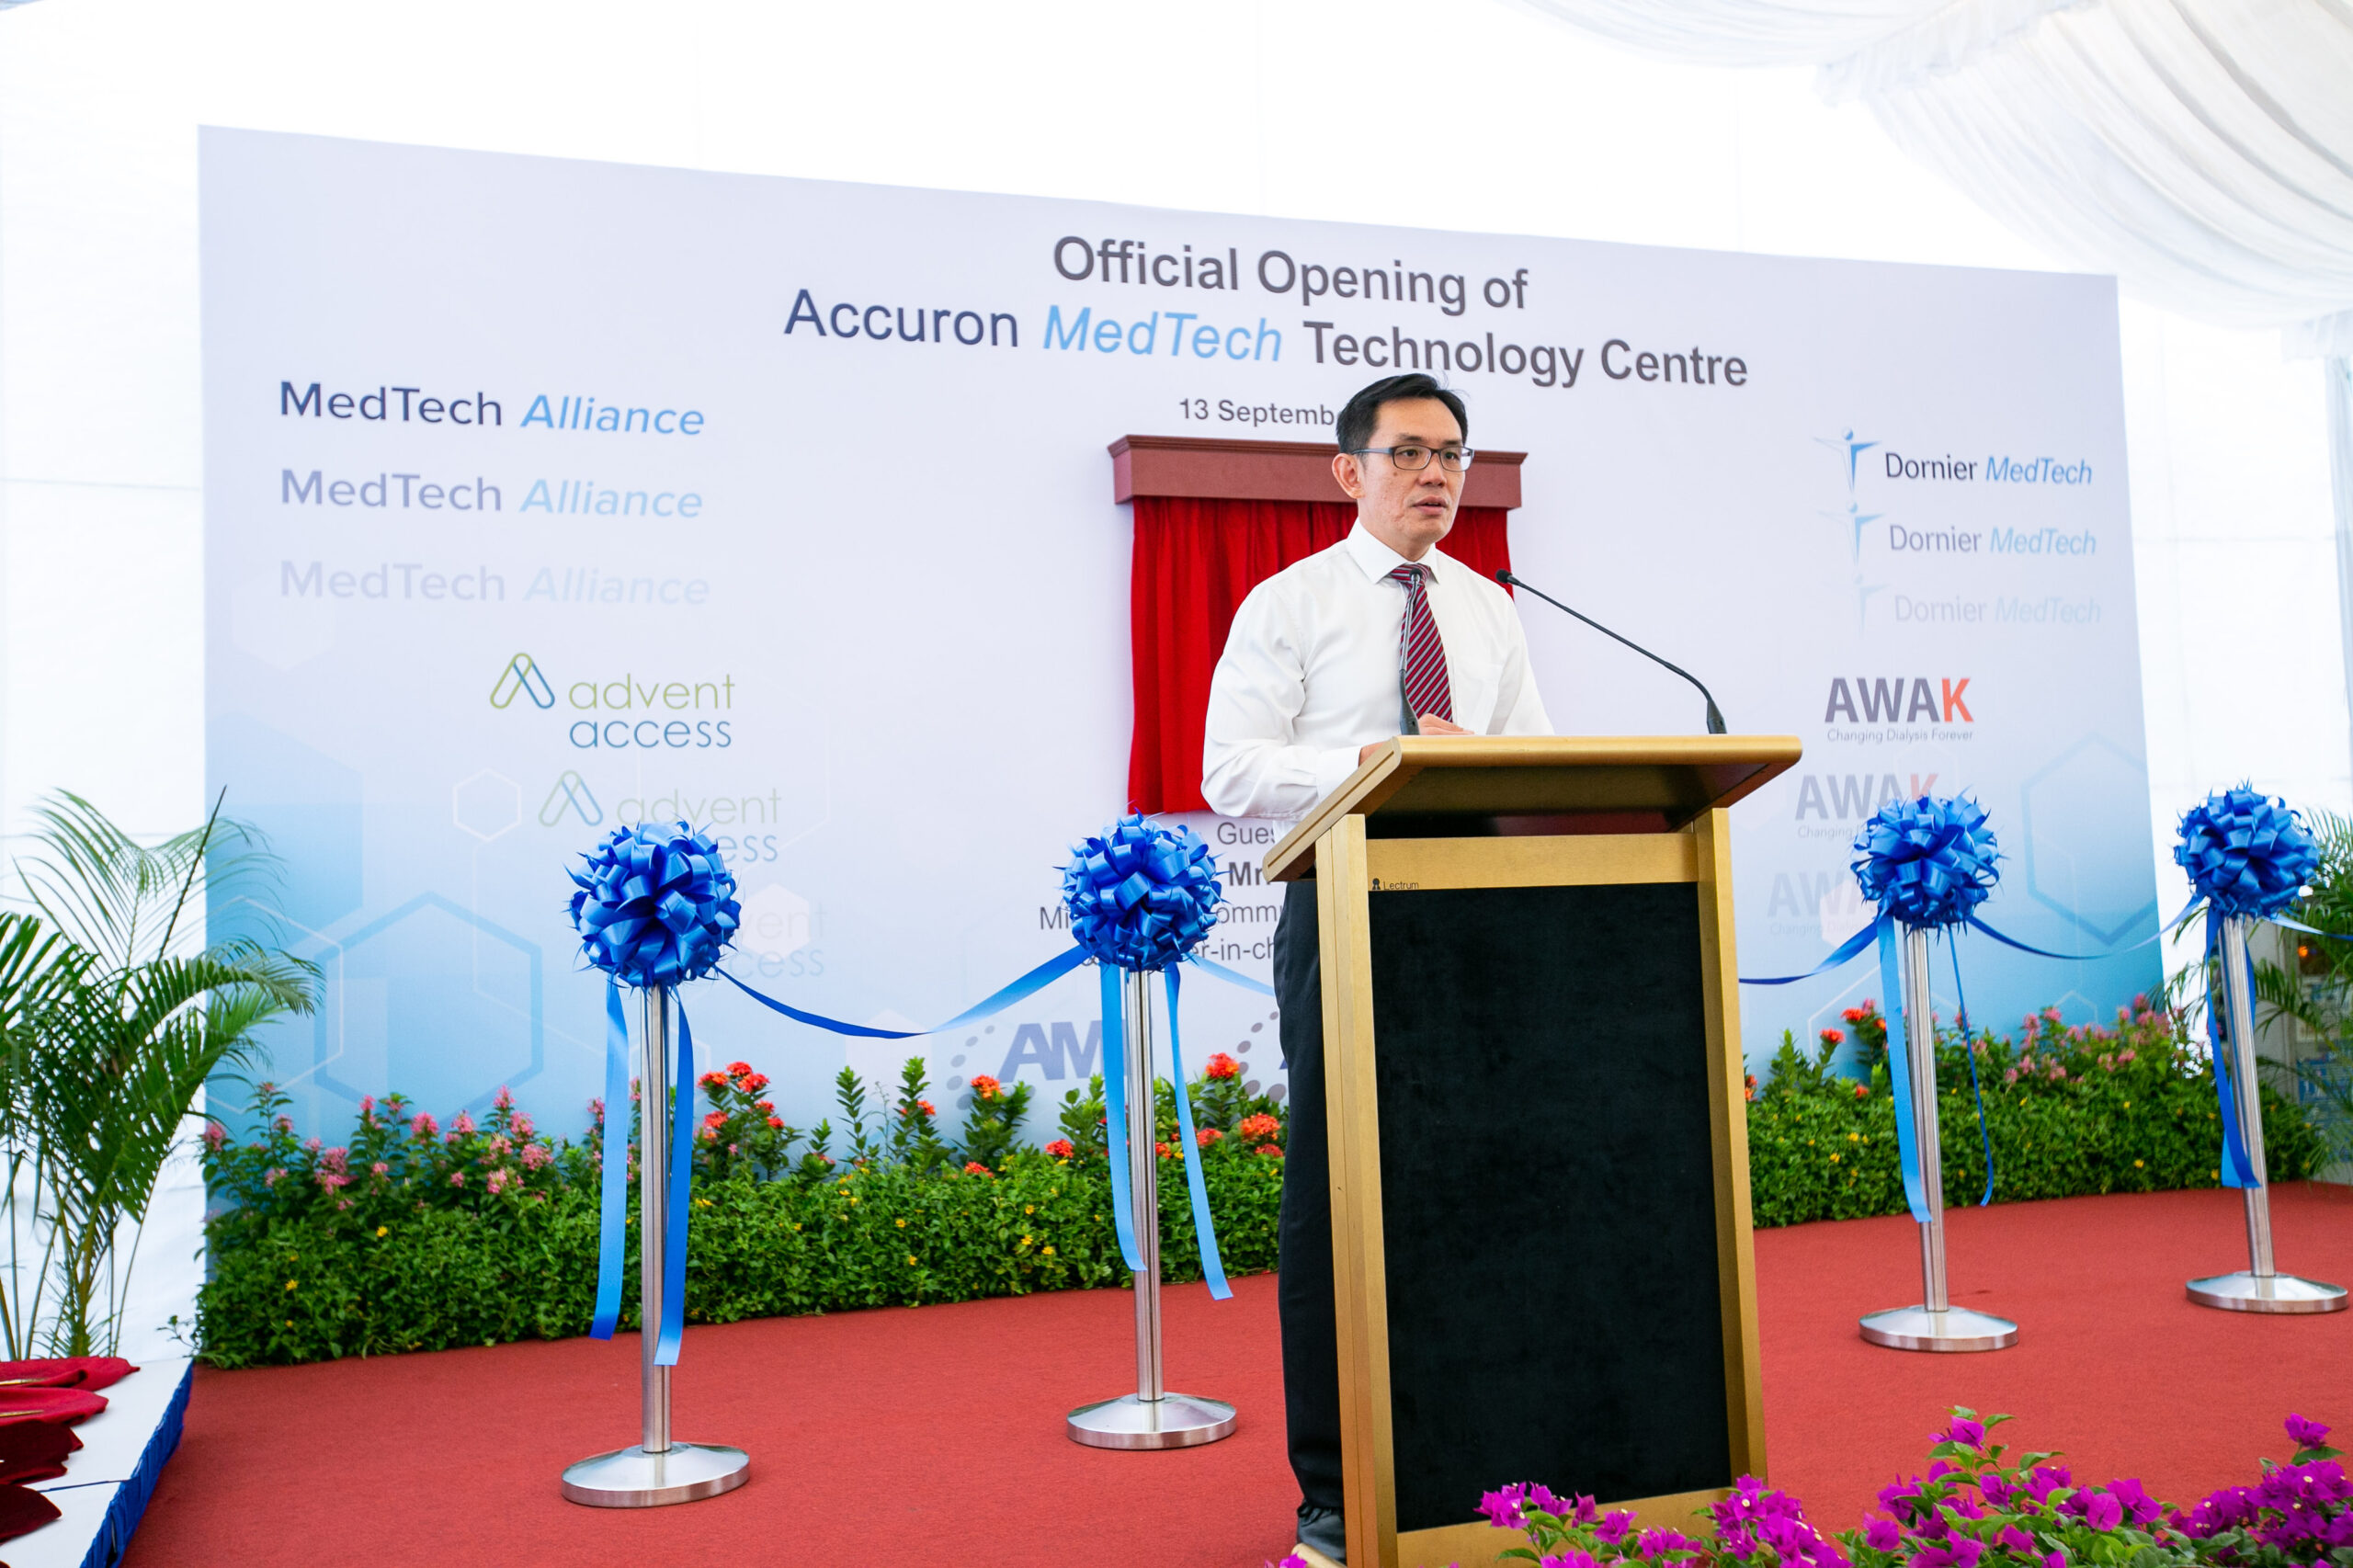 New S$10M Technology Centre in Tuas